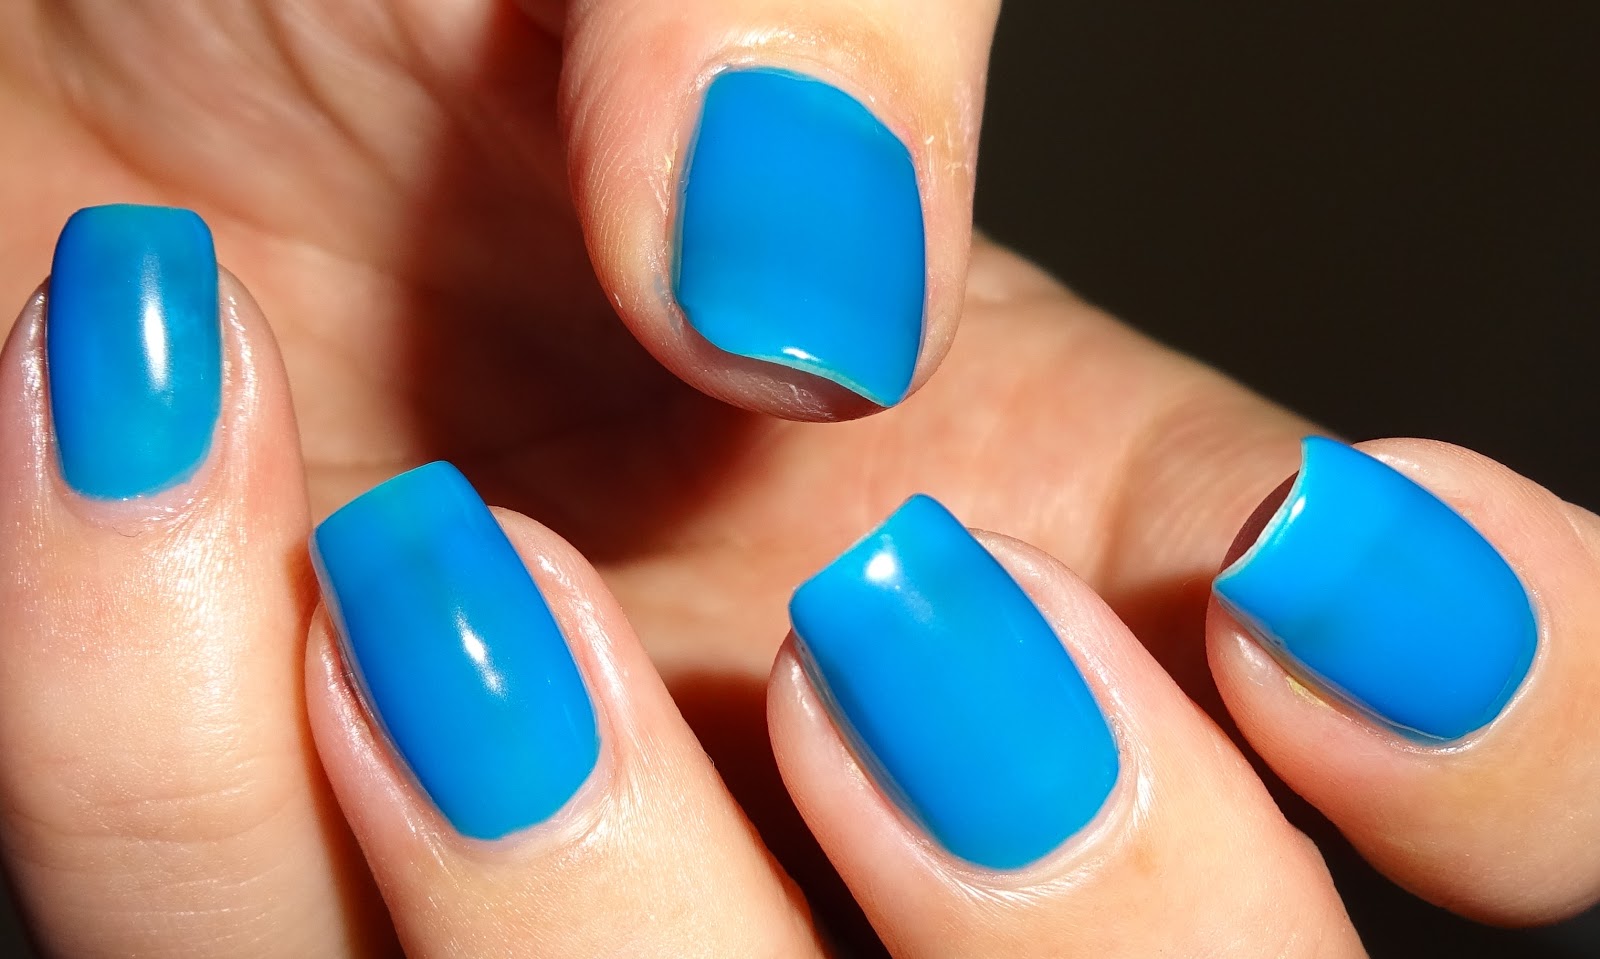 2. How to Choose the Perfect Light Blue Nail Polish for Dark Skin - wide 6